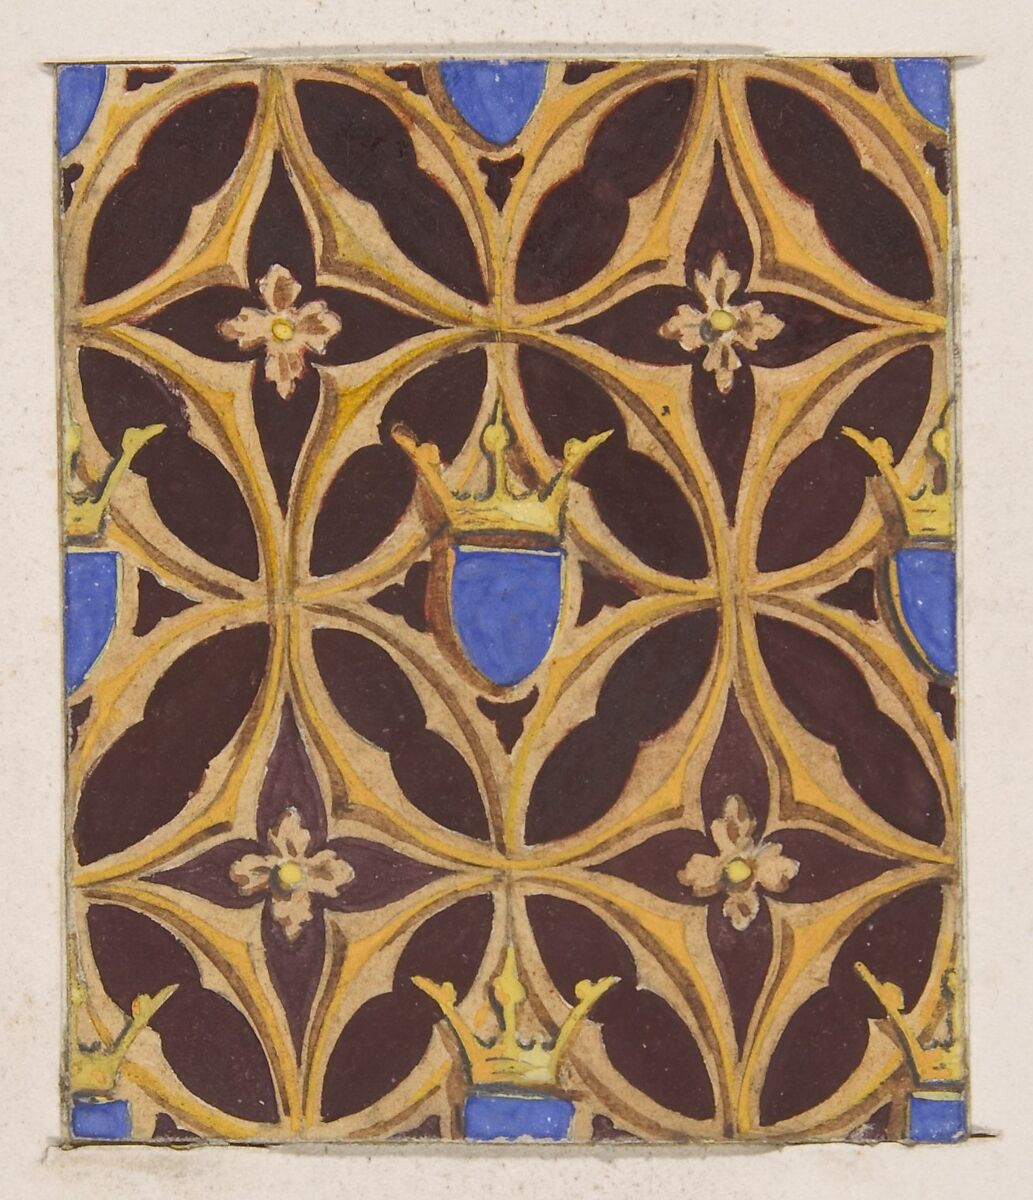 Design for wallpaper featuring blue shields surmouted by crowns, Jules-Edmond-Charles Lachaise (French, died 1897), graphite and gouache on wove paper 